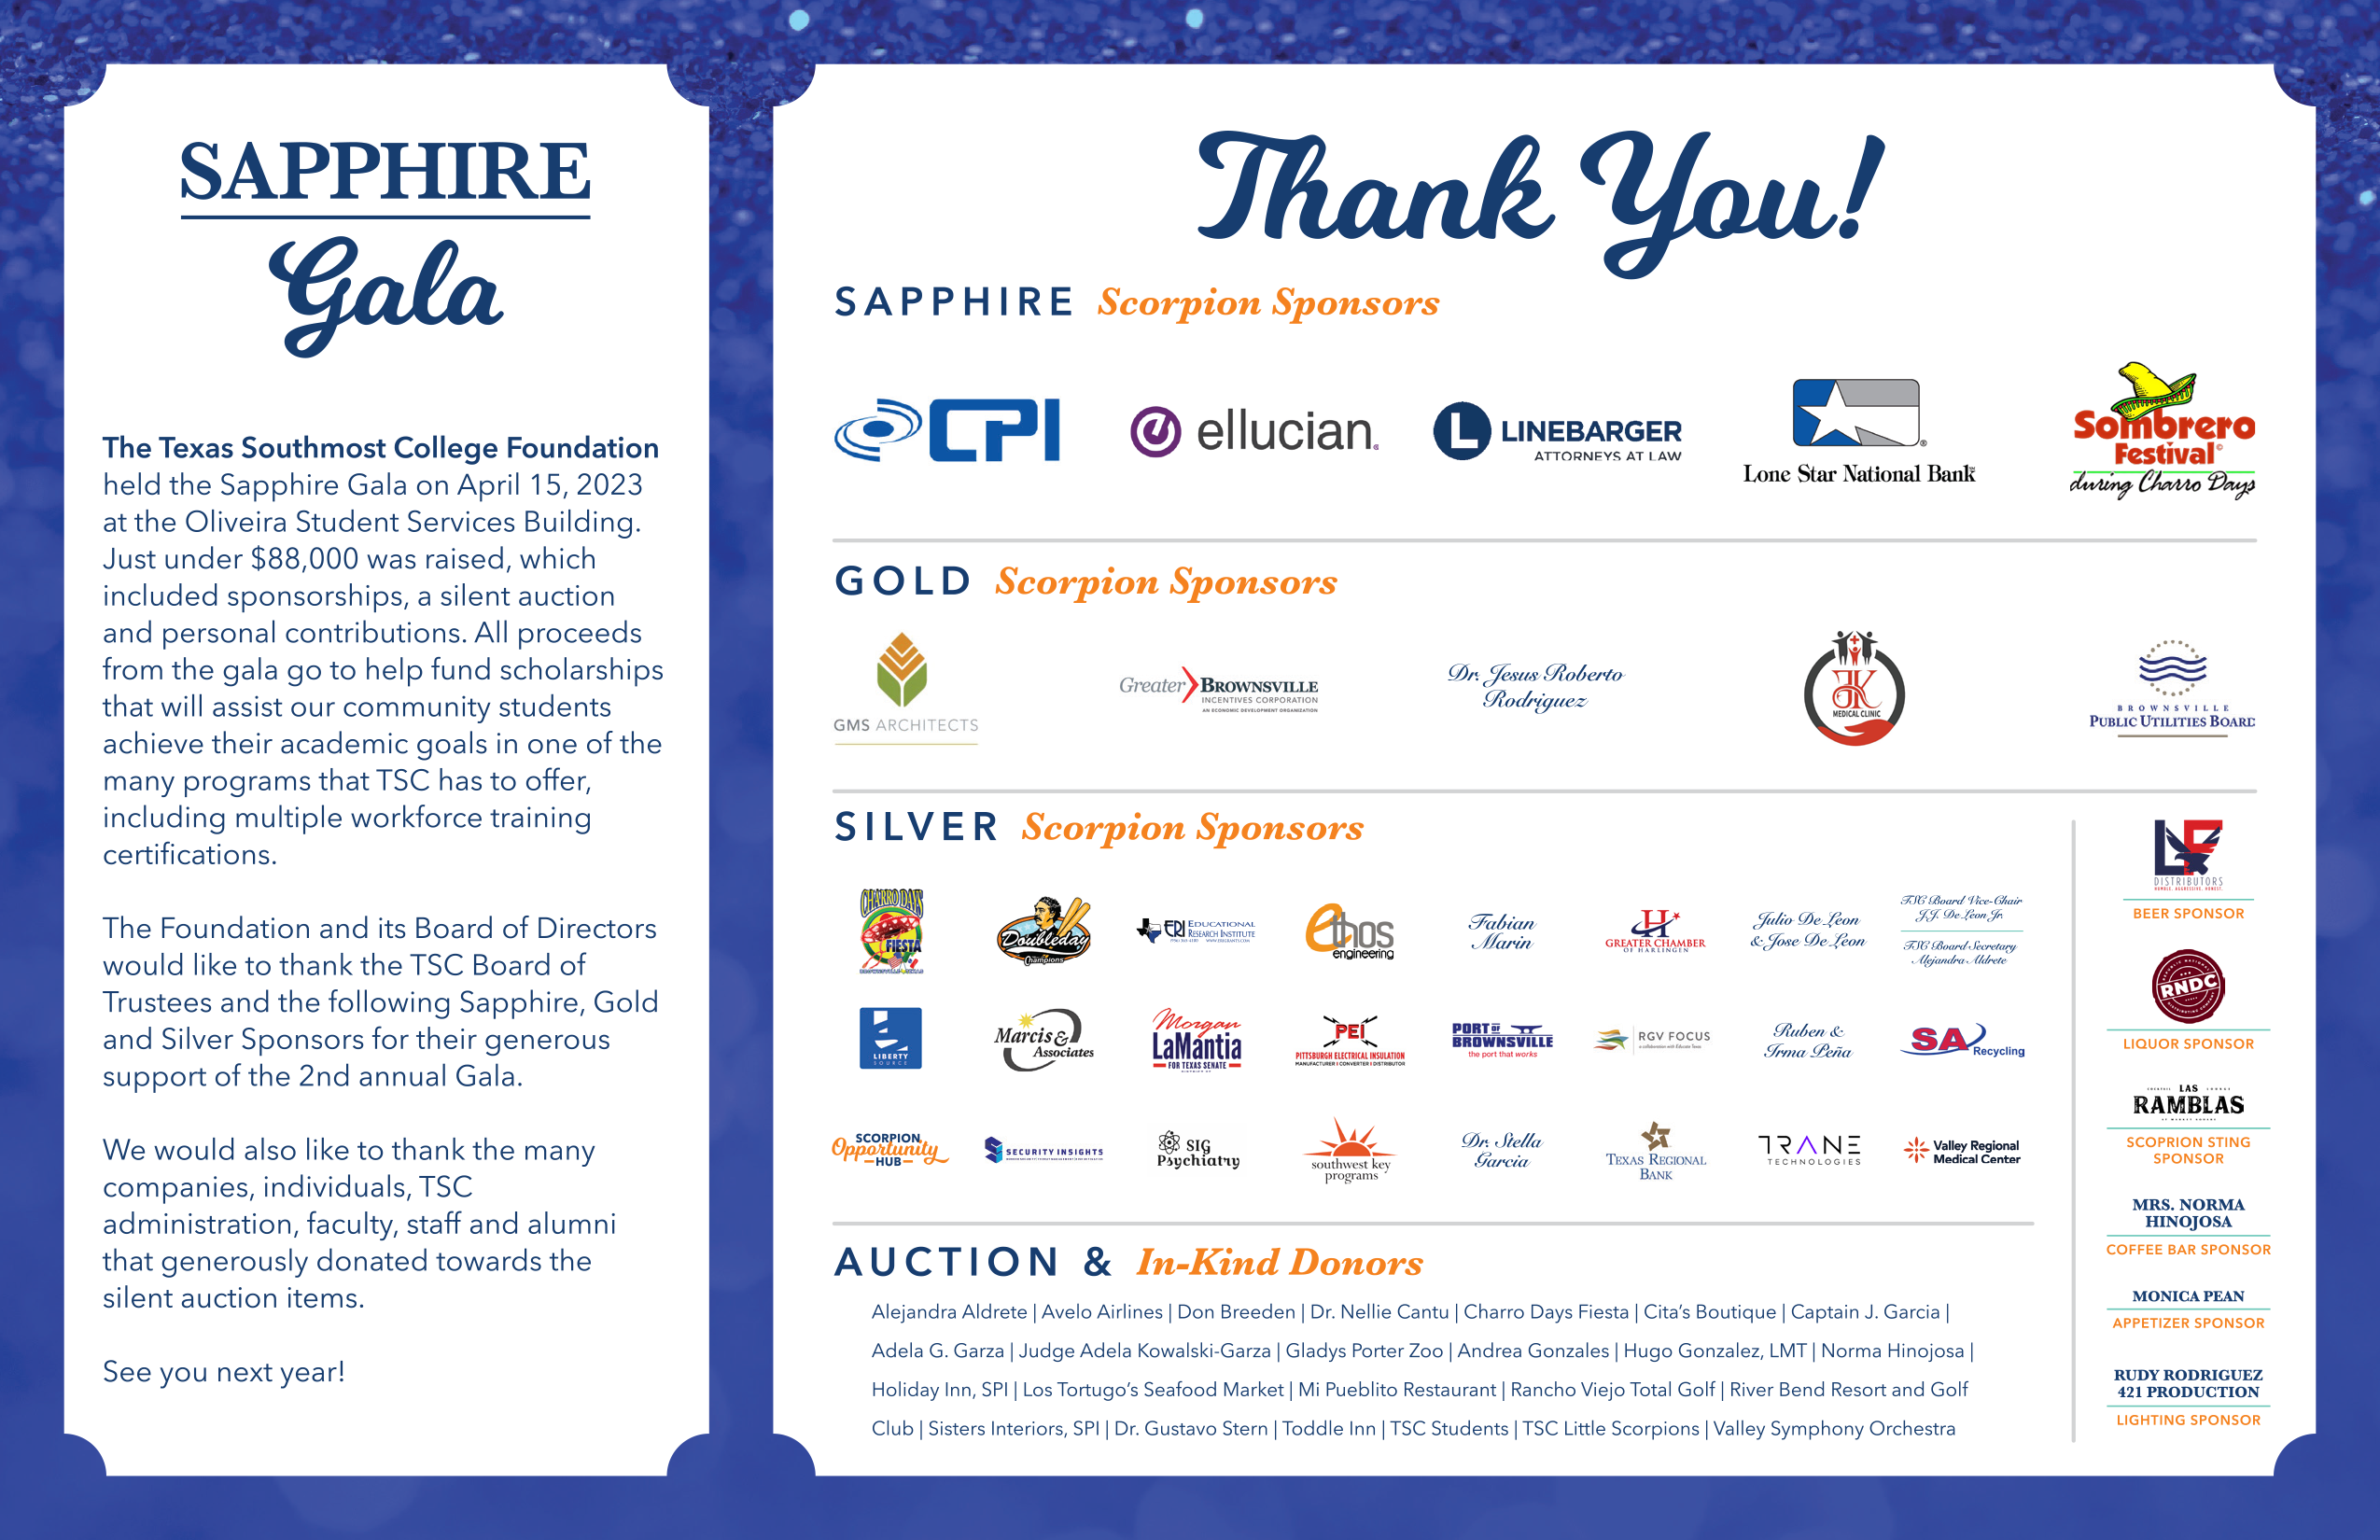 Thank You Sapphire Gala Sponsors for supporting Texas Southmost College Students.